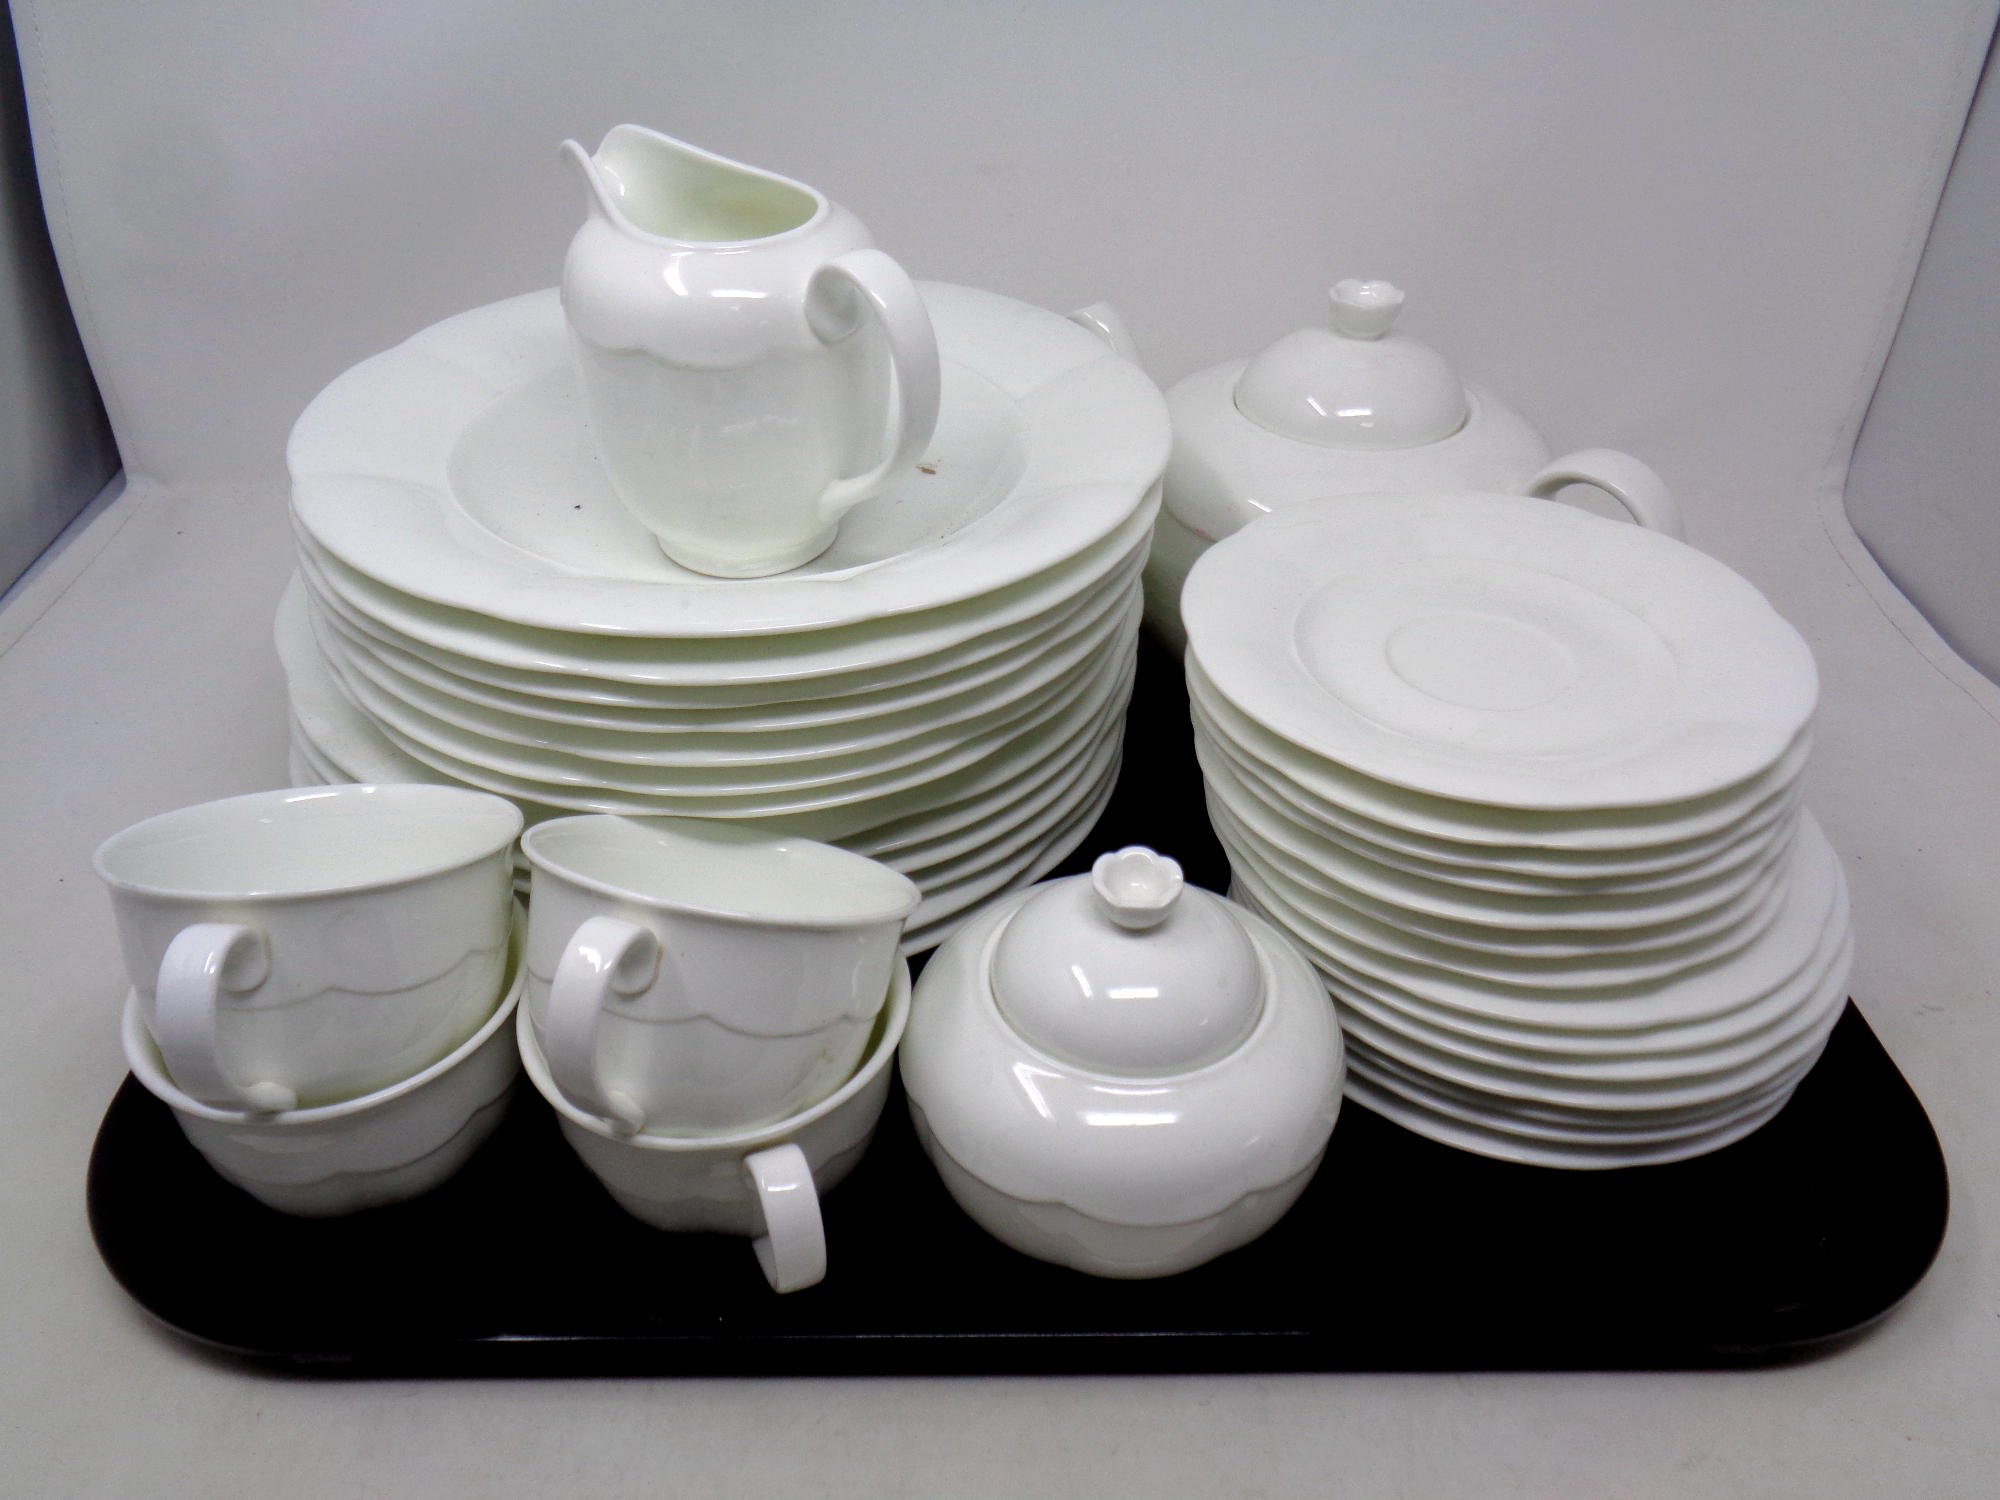 A tray containing 34 pieces of Villeroy and Boch bone china tea and dinnerware